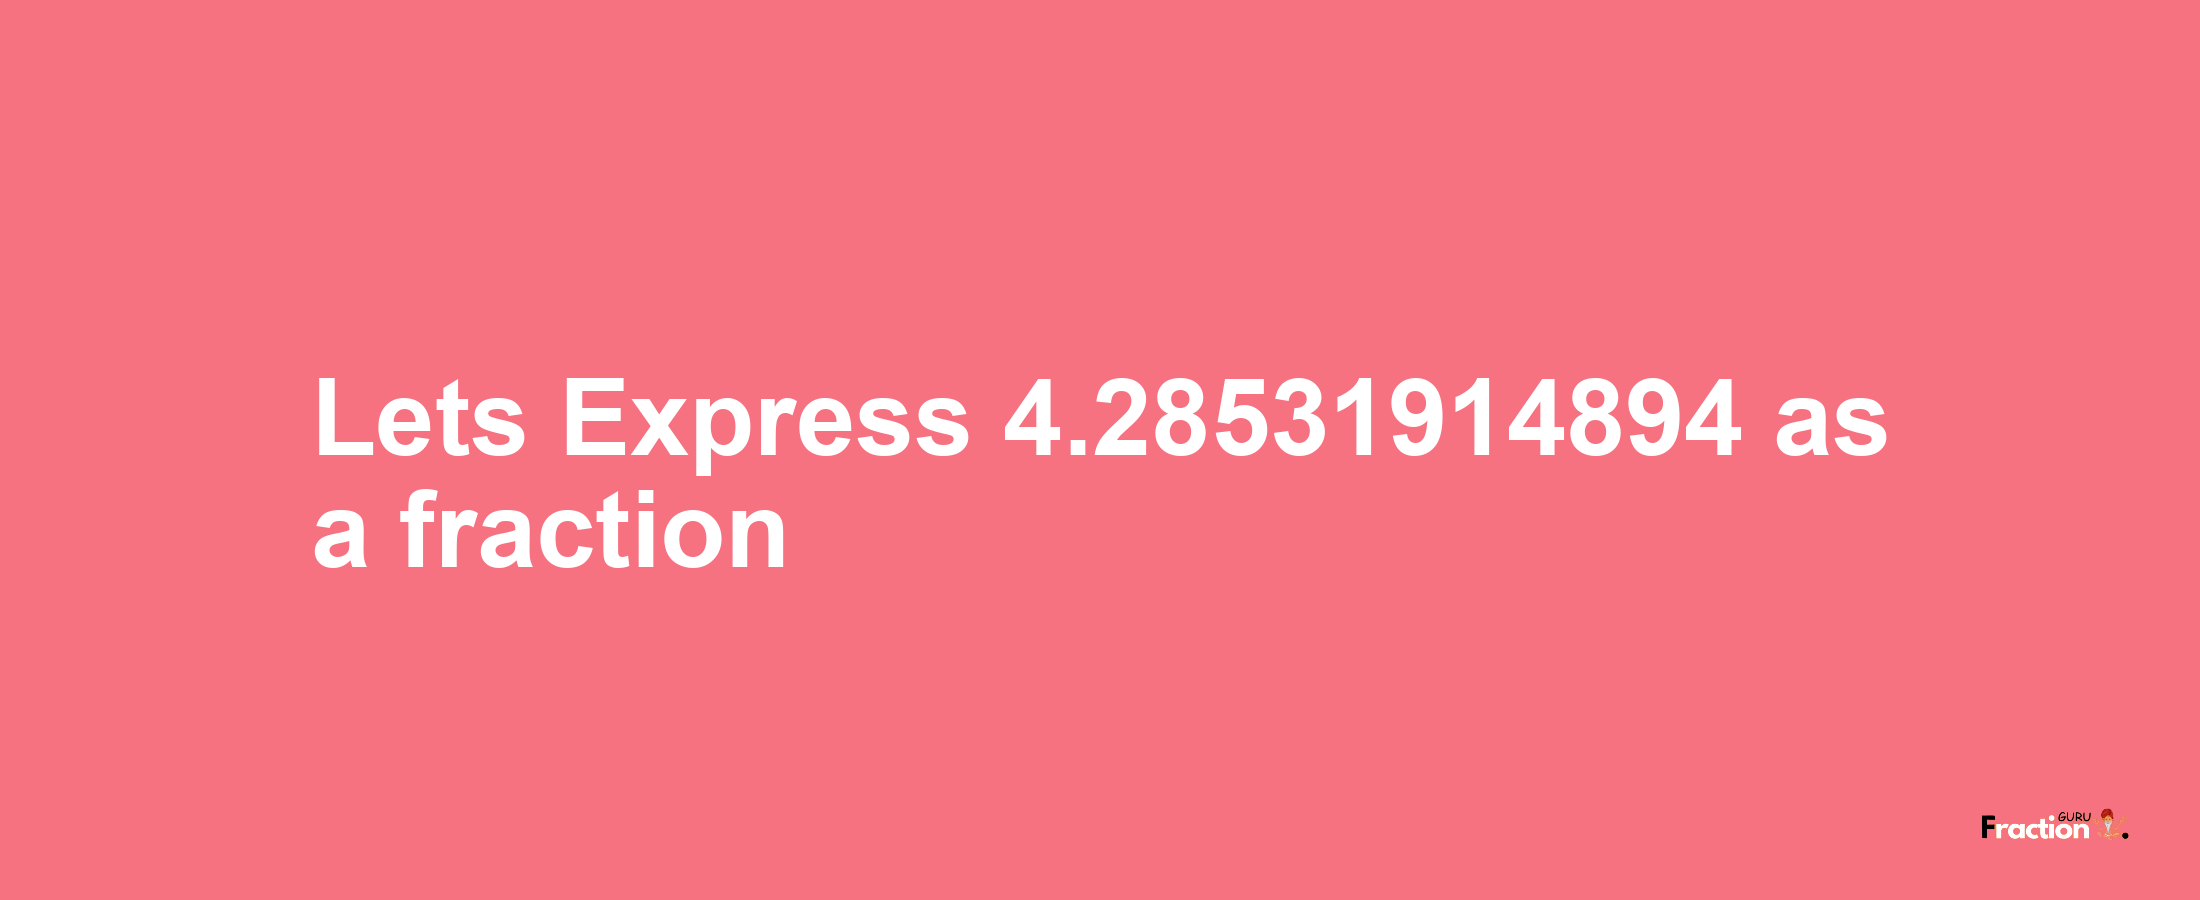 Lets Express 4.28531914894 as afraction